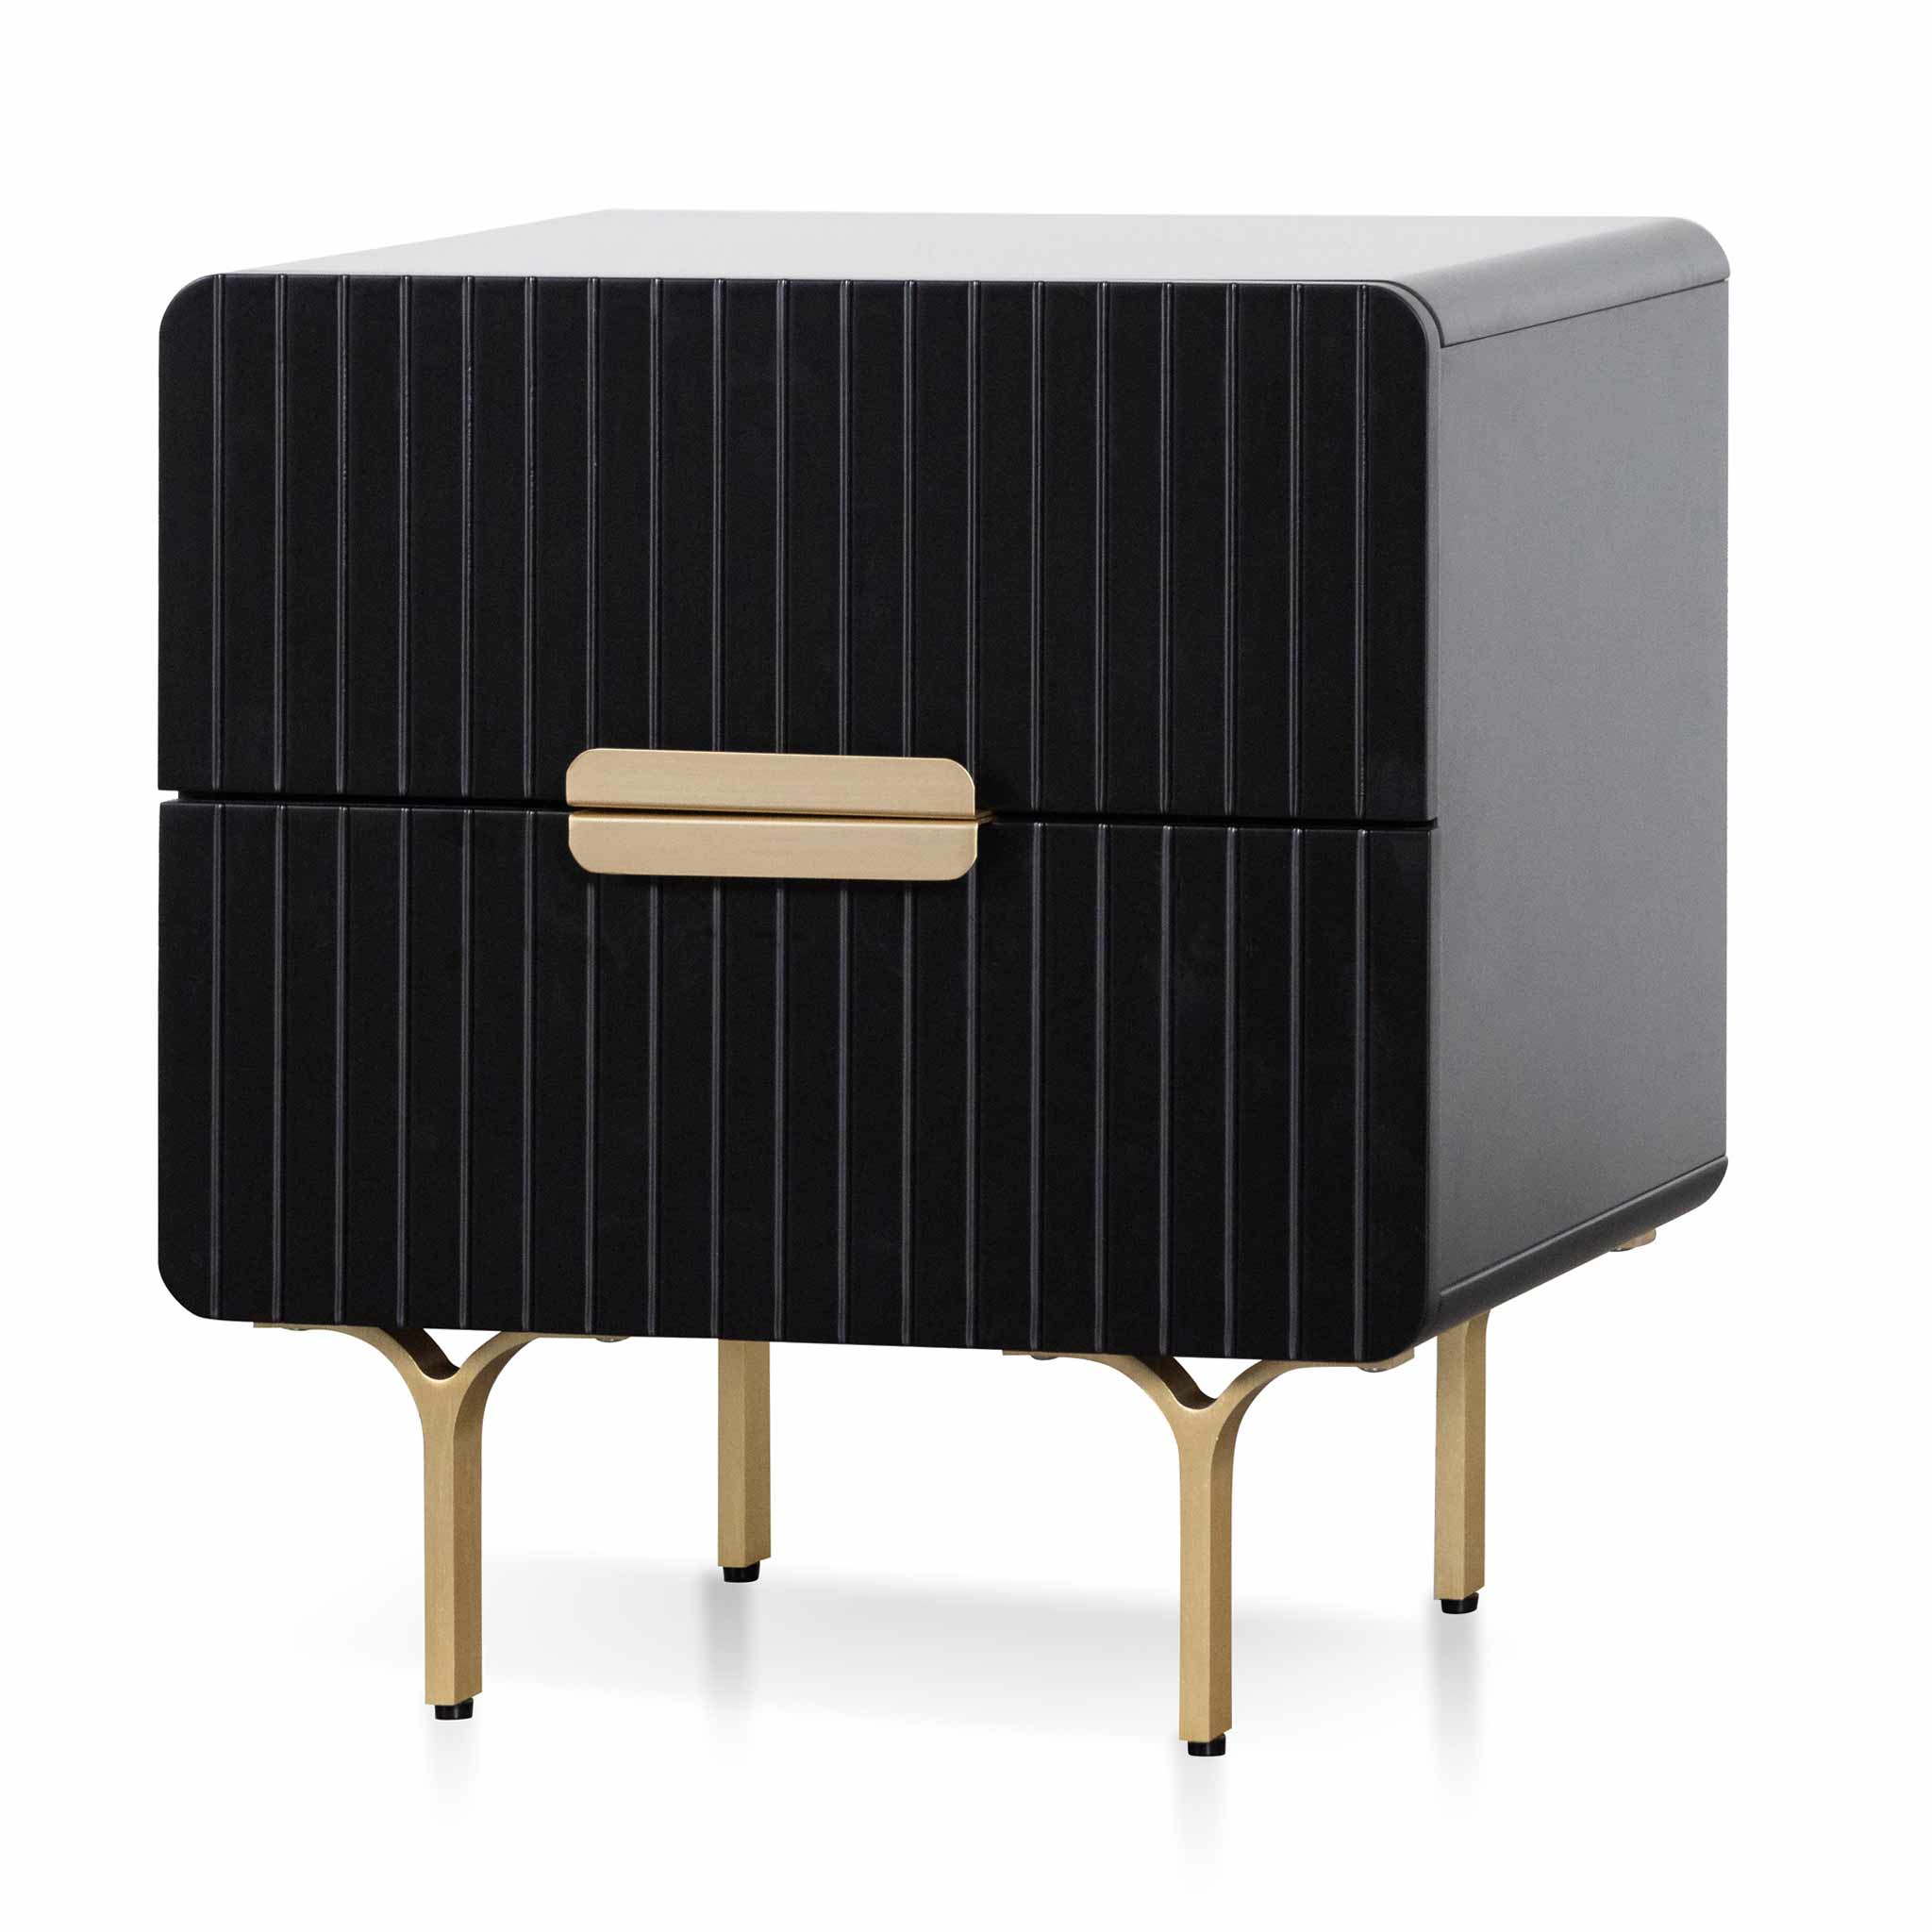 Maxwell Matte Black Bedside Table - Brass Legs and Handle - Bedside Tables